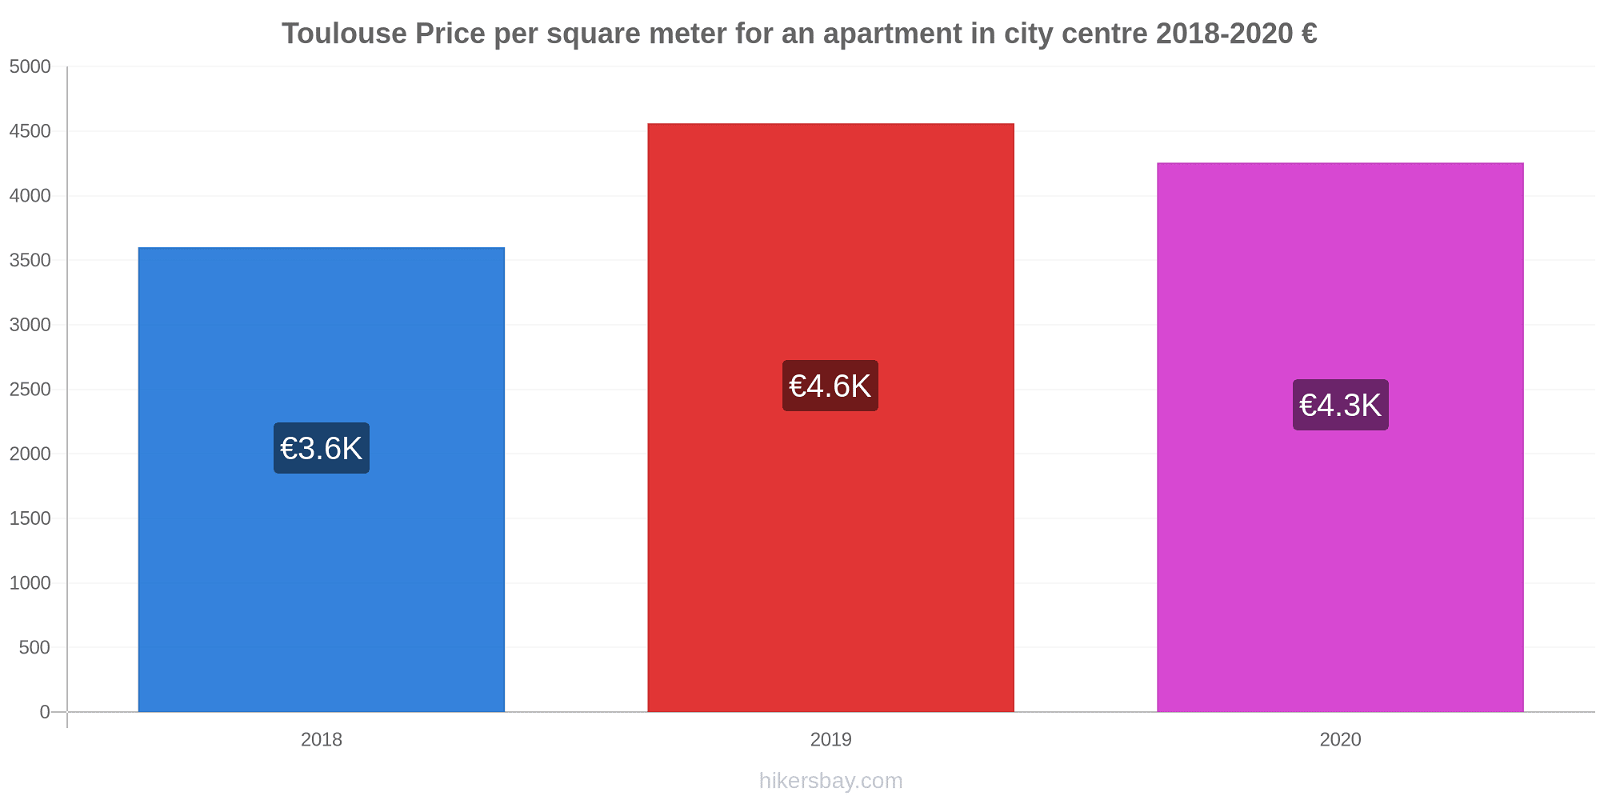 Toulouse price changes Price per square meter for an apartment in city centre hikersbay.com